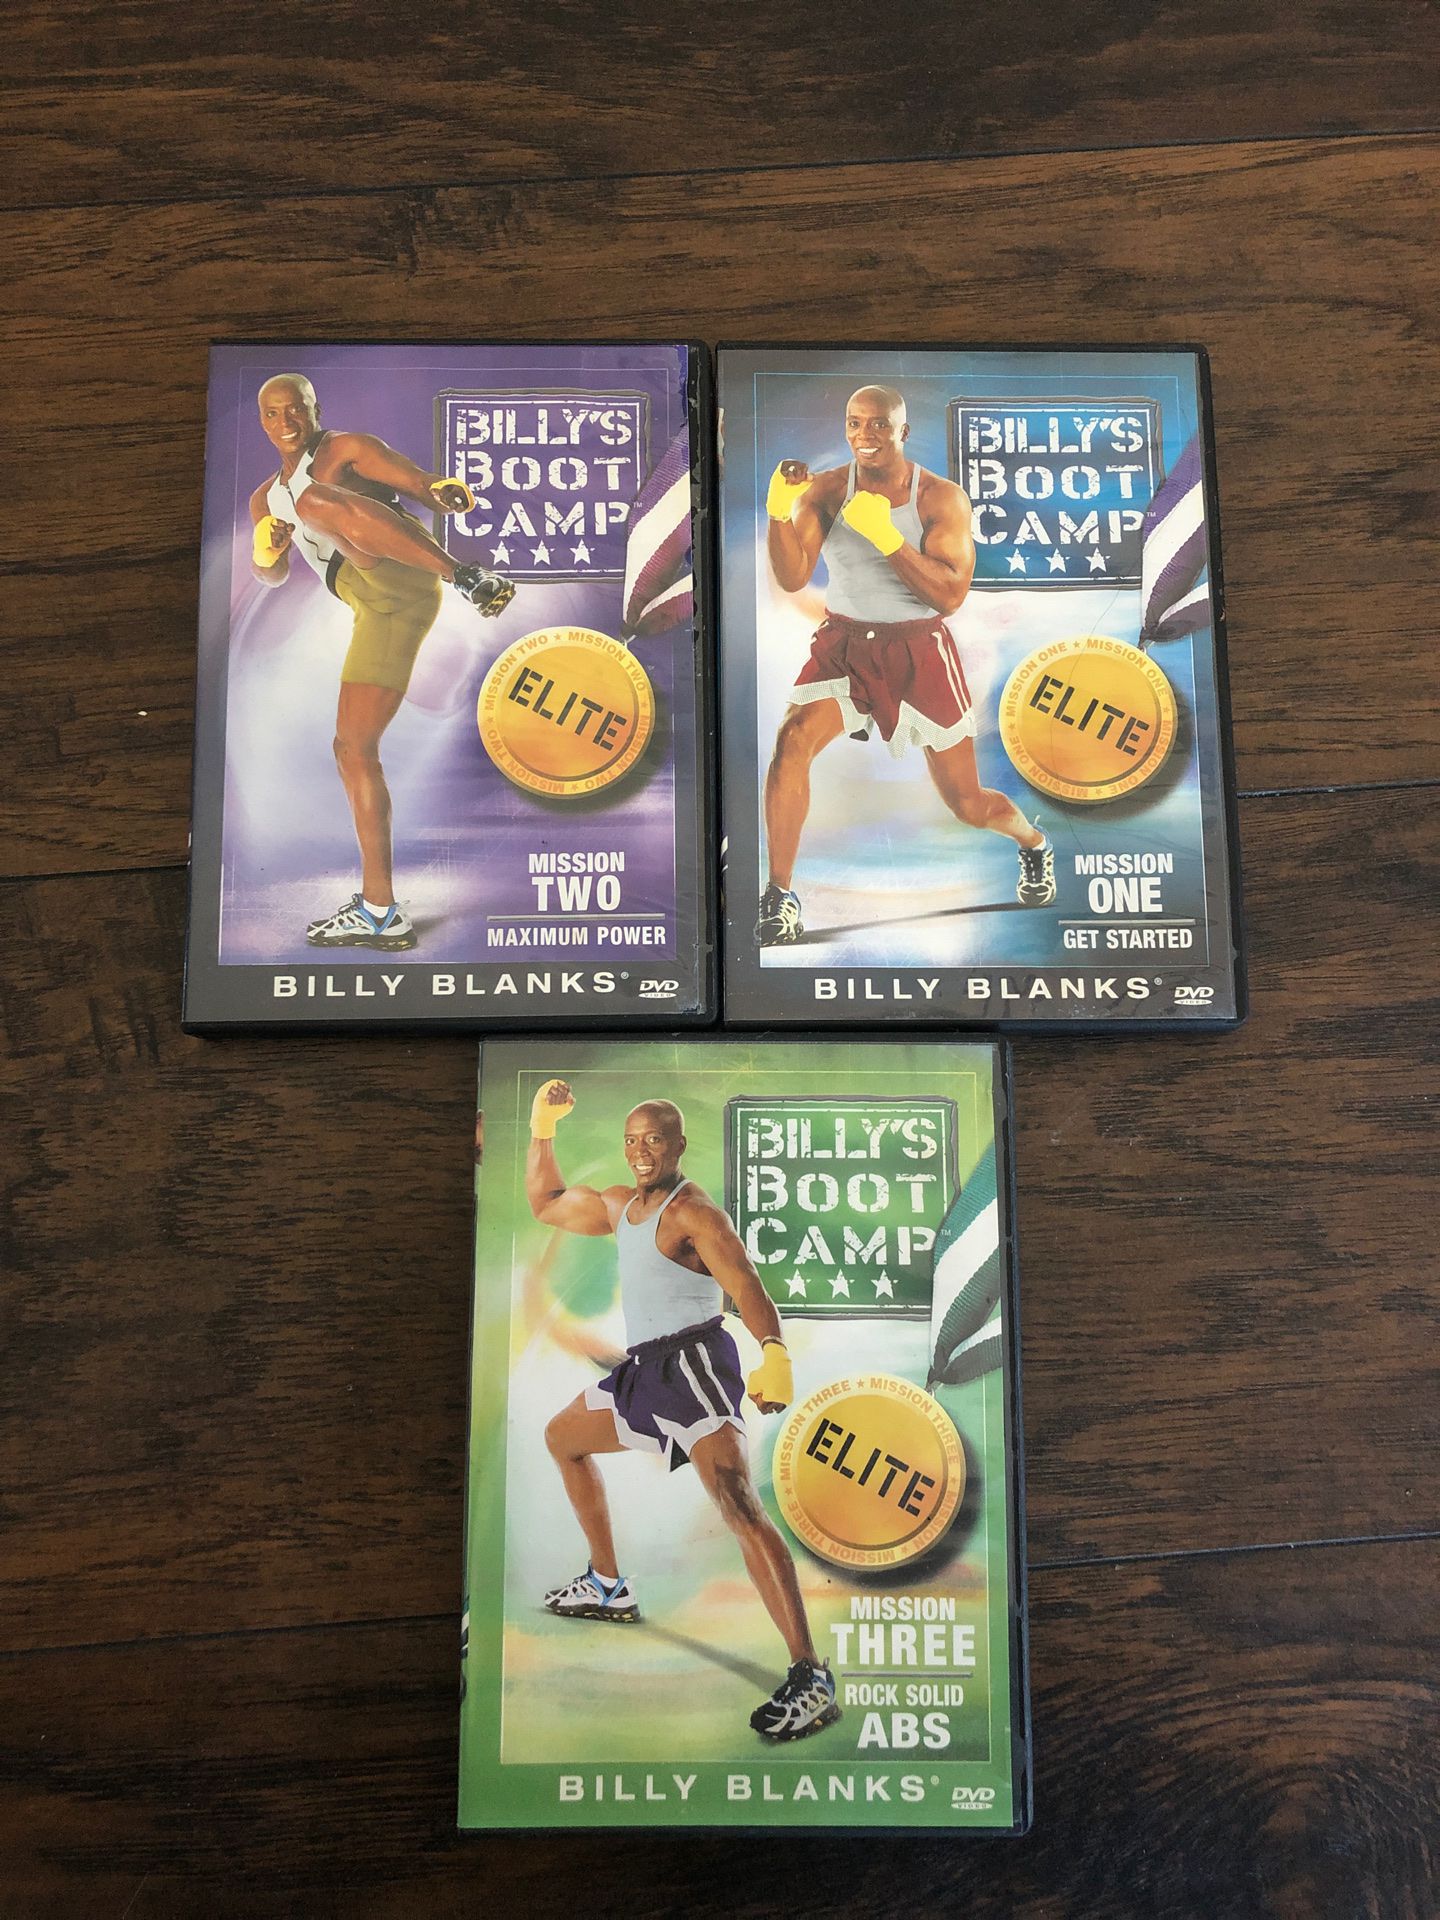 Billy’s Bootcamp workout DVDs set of 3